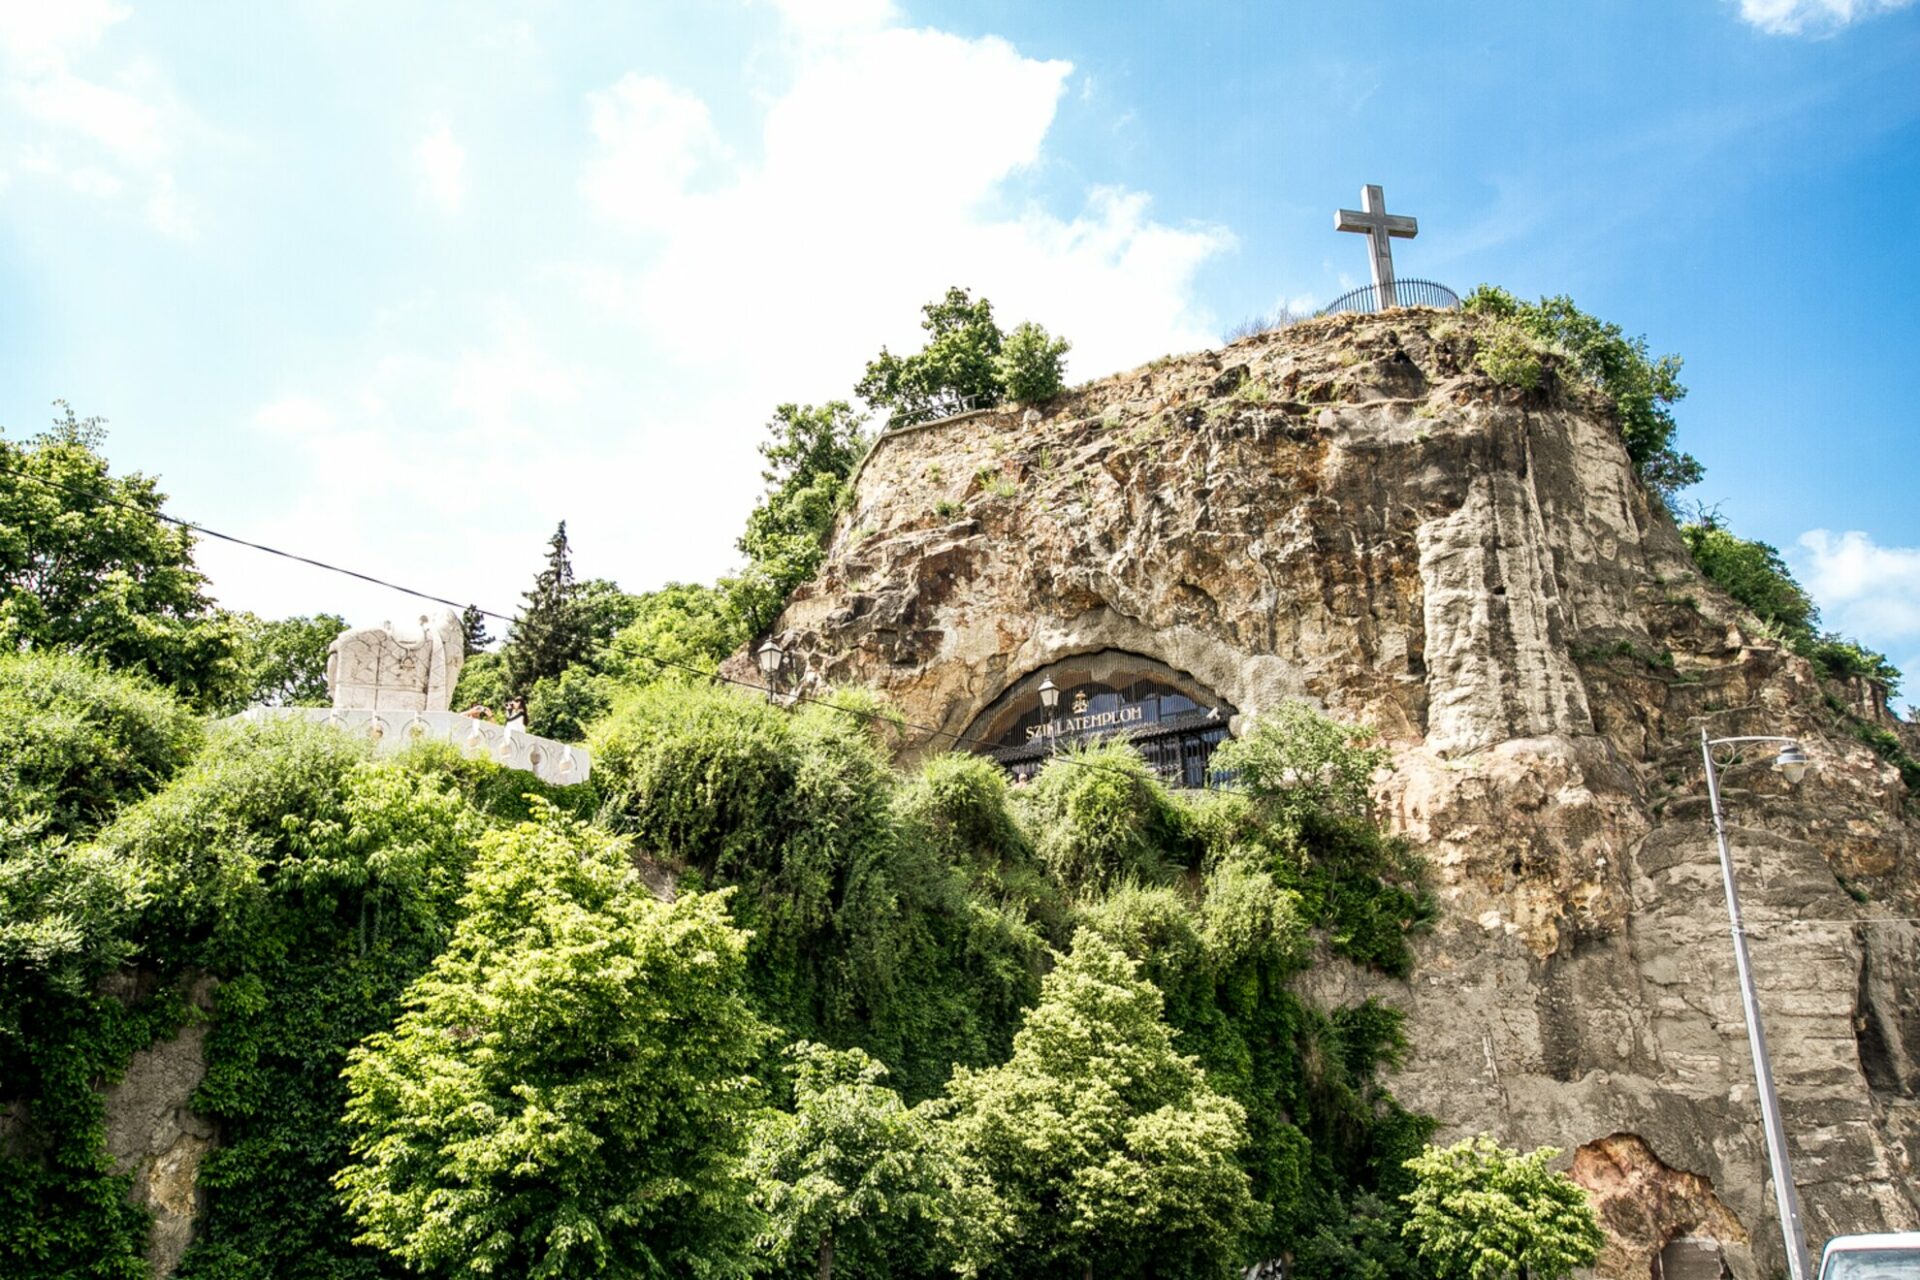 The Gellért Hill and the entrance of the Cave Church